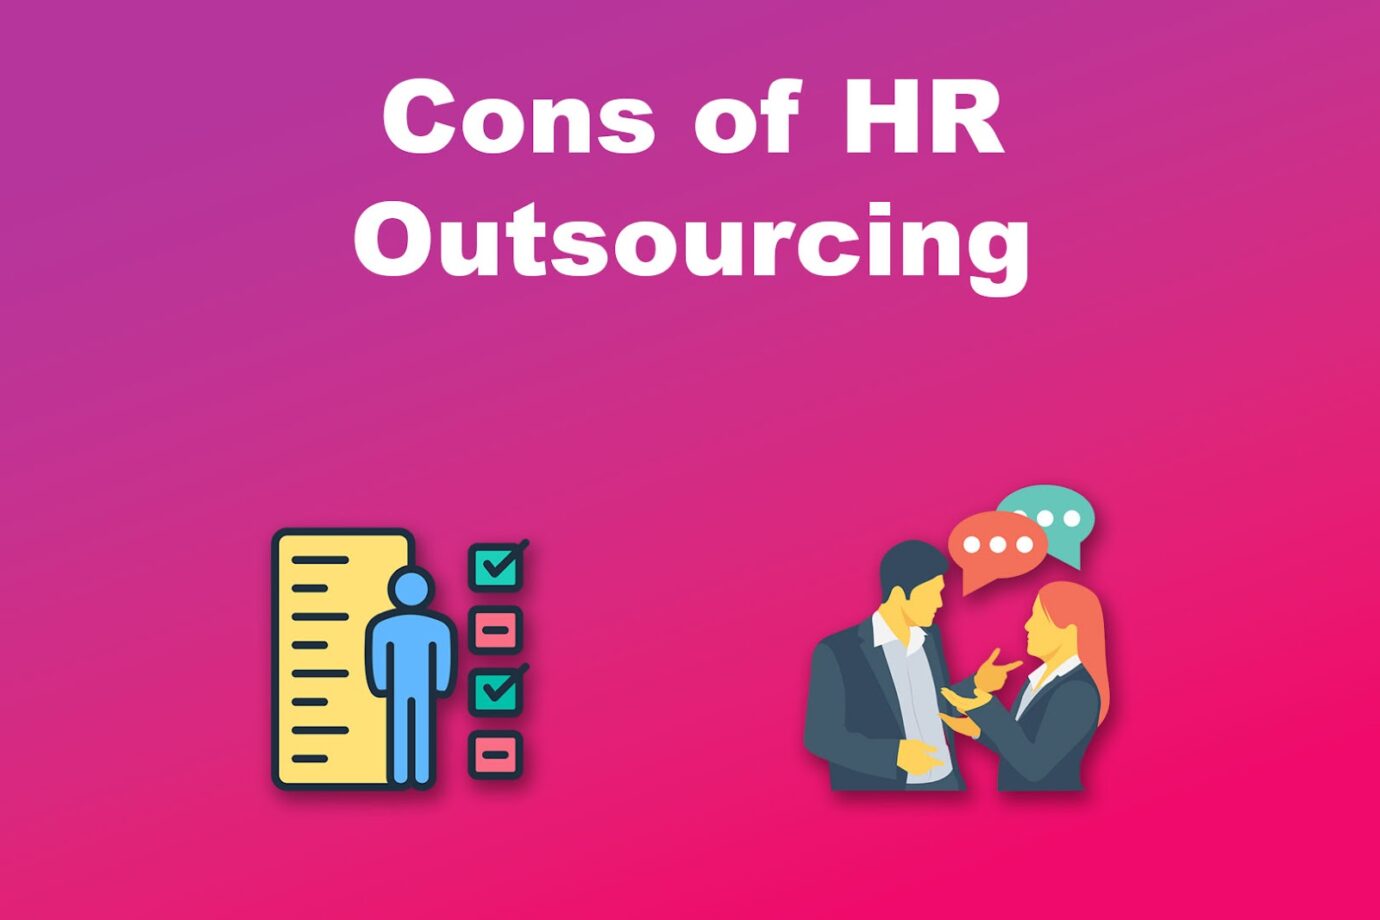 The Cons of HR Outsourcing